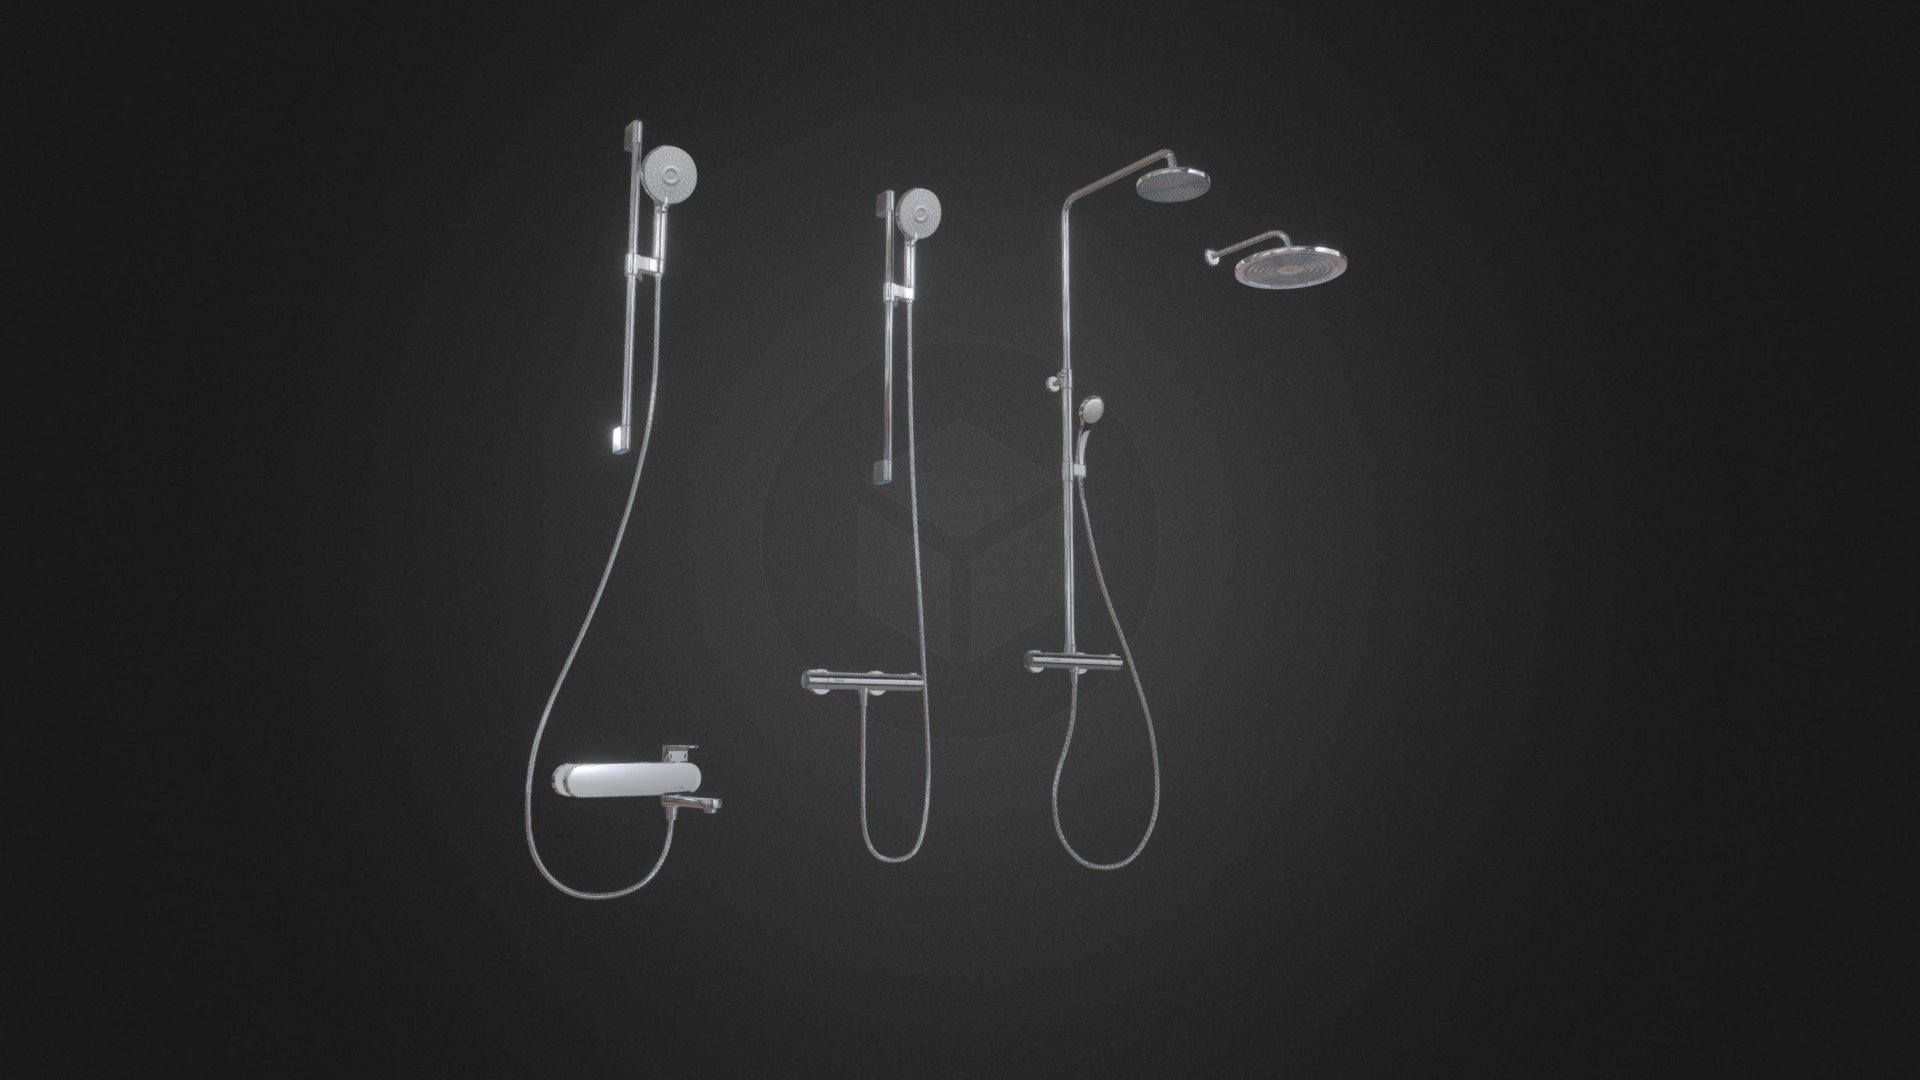 Bathroom mixer set Ravak set 01

This set: 

The model given is easy to use 



1 file obj standard 



1 file 3ds Max 2013 vray material 



1 file 3ds Max 2013 corona material 



1 file of 3Ds 



Topology of geometry:
- forms and proportions of The 3D model 
- the geometry of the model was created very neatly 
- there are no many-sided polygons 
- detailed enough for close-up renders 
- the model optimized for turbosmooth modifier 
- Not collapsed the turbosmooth modified 
- apply the Smooth modifier with a parameter to get the desired level of detail

Materials and Textures:


3ds max files included Vray-Shaders 
3ds max files included Corona-Shaders 
all texture paths are cleared

Excellent renders to you! - Bathroom mixer set Ravak set 01 - Buy Royalty Free 3D model by madMIX 3d model